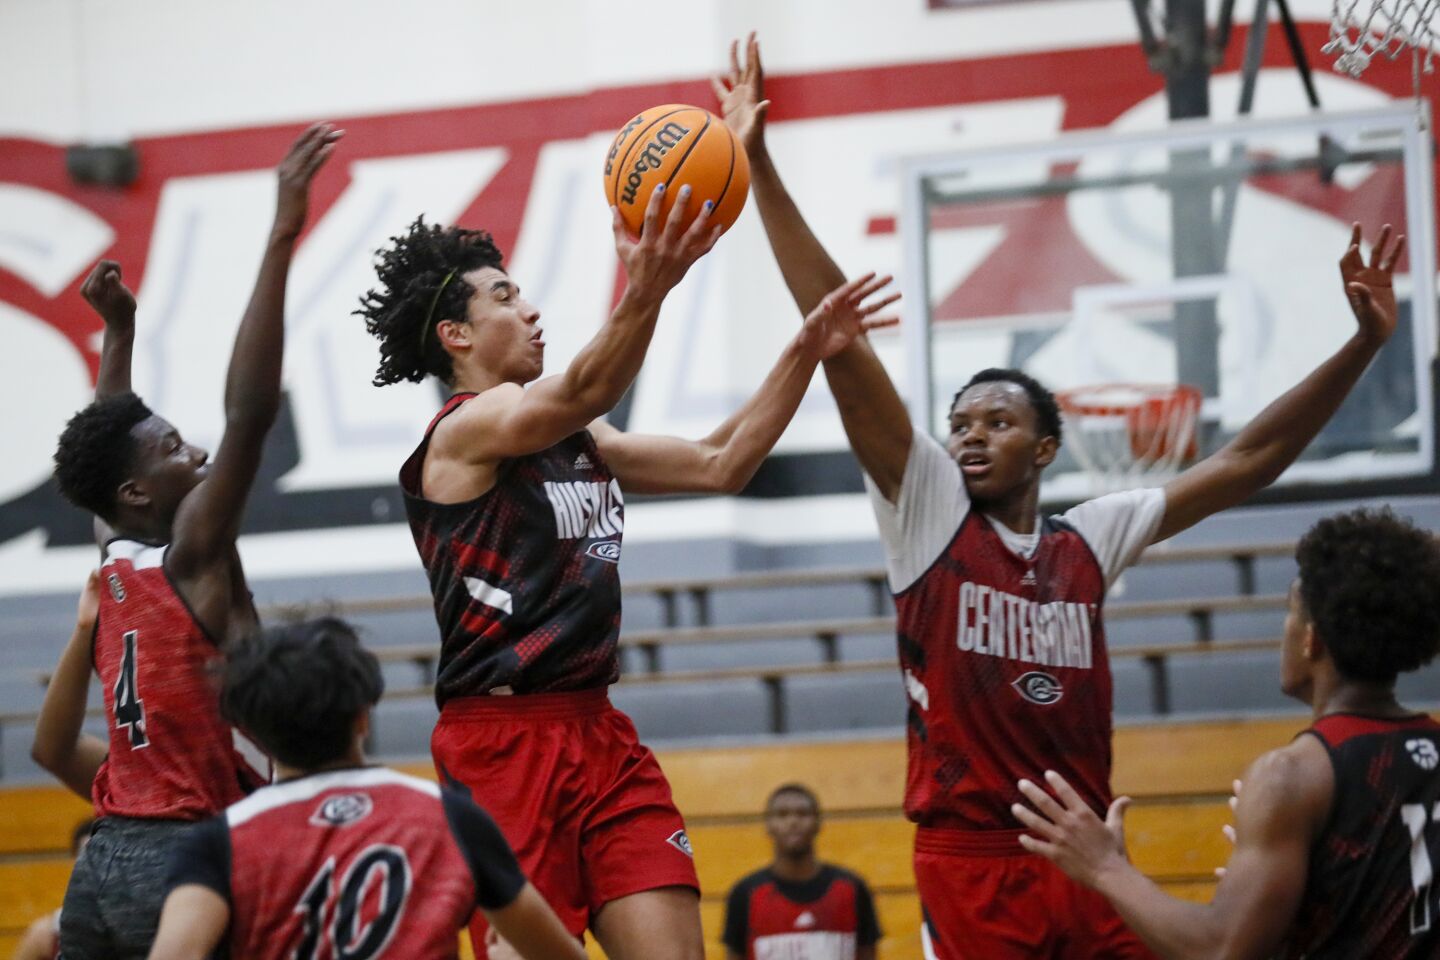 Centennial hoop star Jared McCain building a potential fortune Los